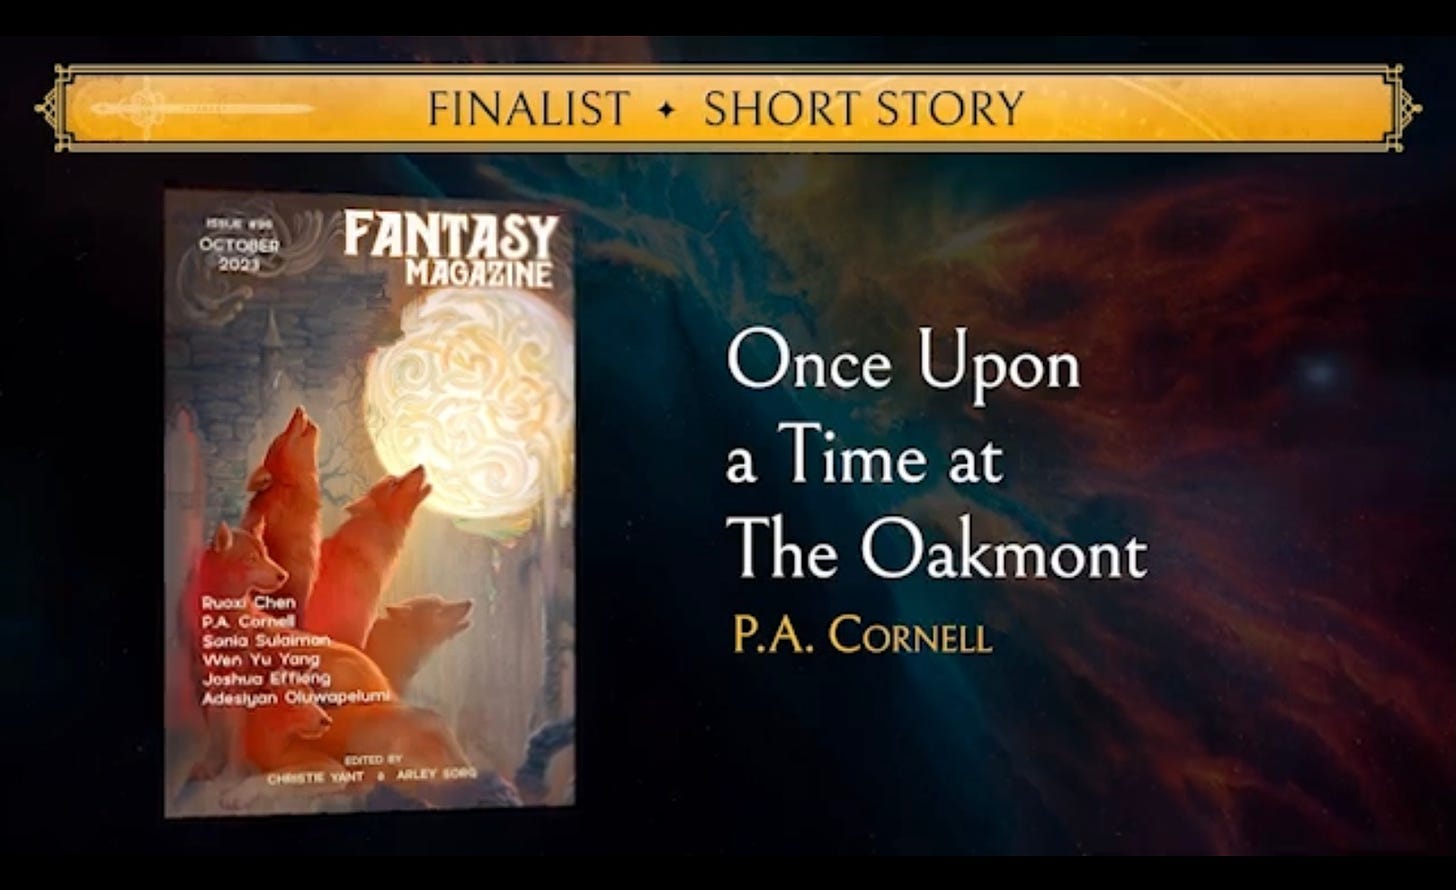 Image of Fantasy Magazine October 2024 Issue. Text says: Finalist - Short Story, Once Upon a Time at The Oakmont, P.A. Cornell